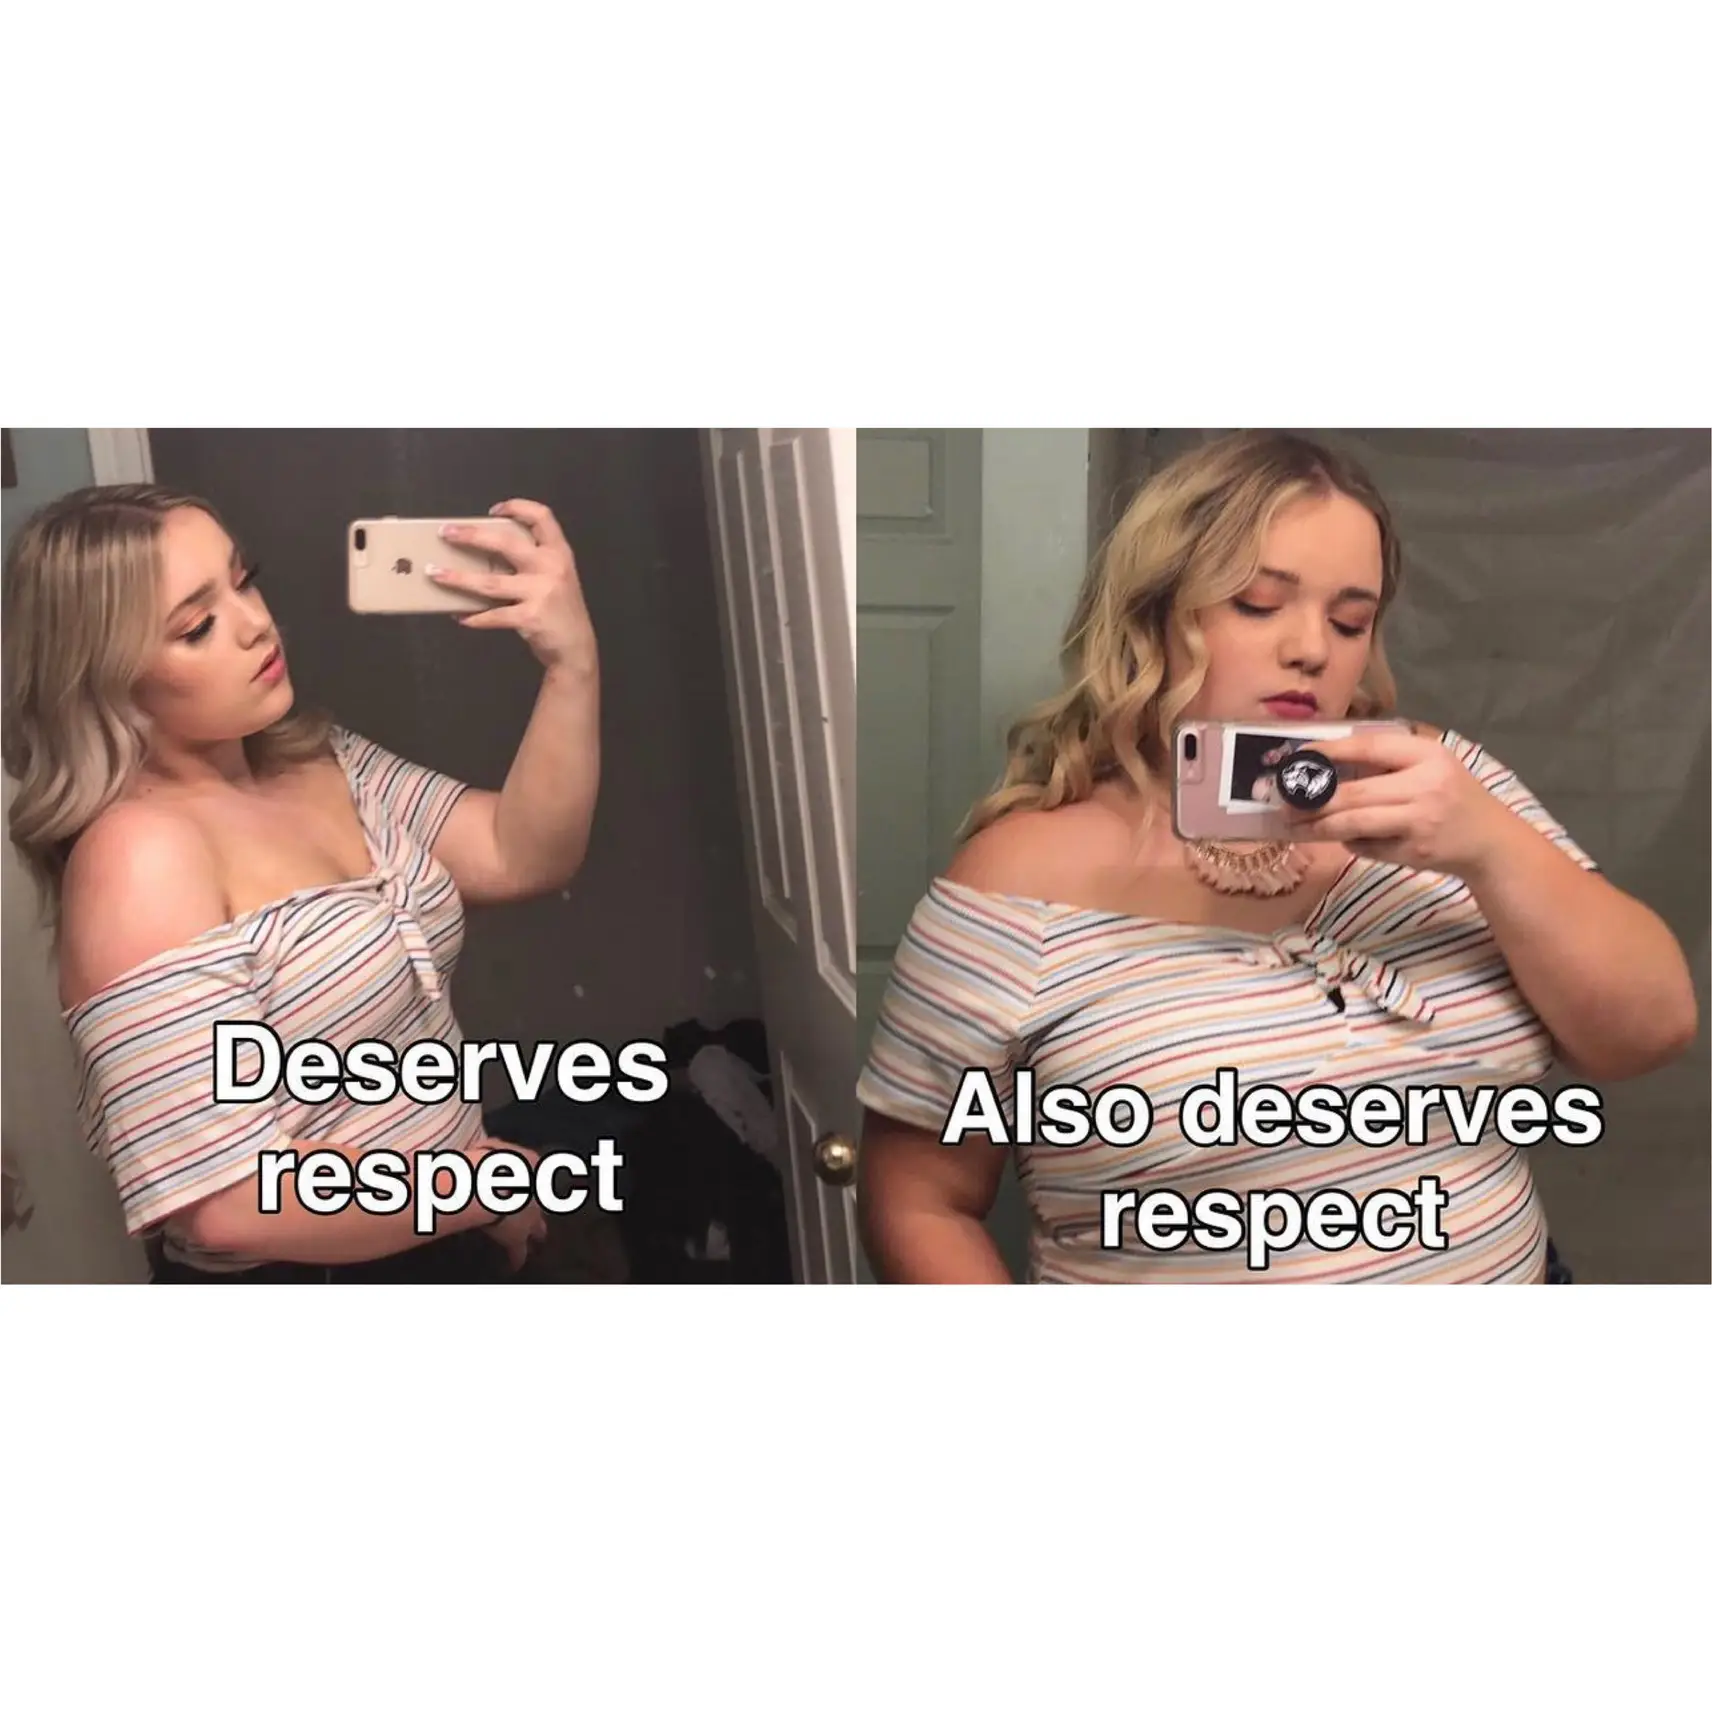 I was a fatphobic fat person's images